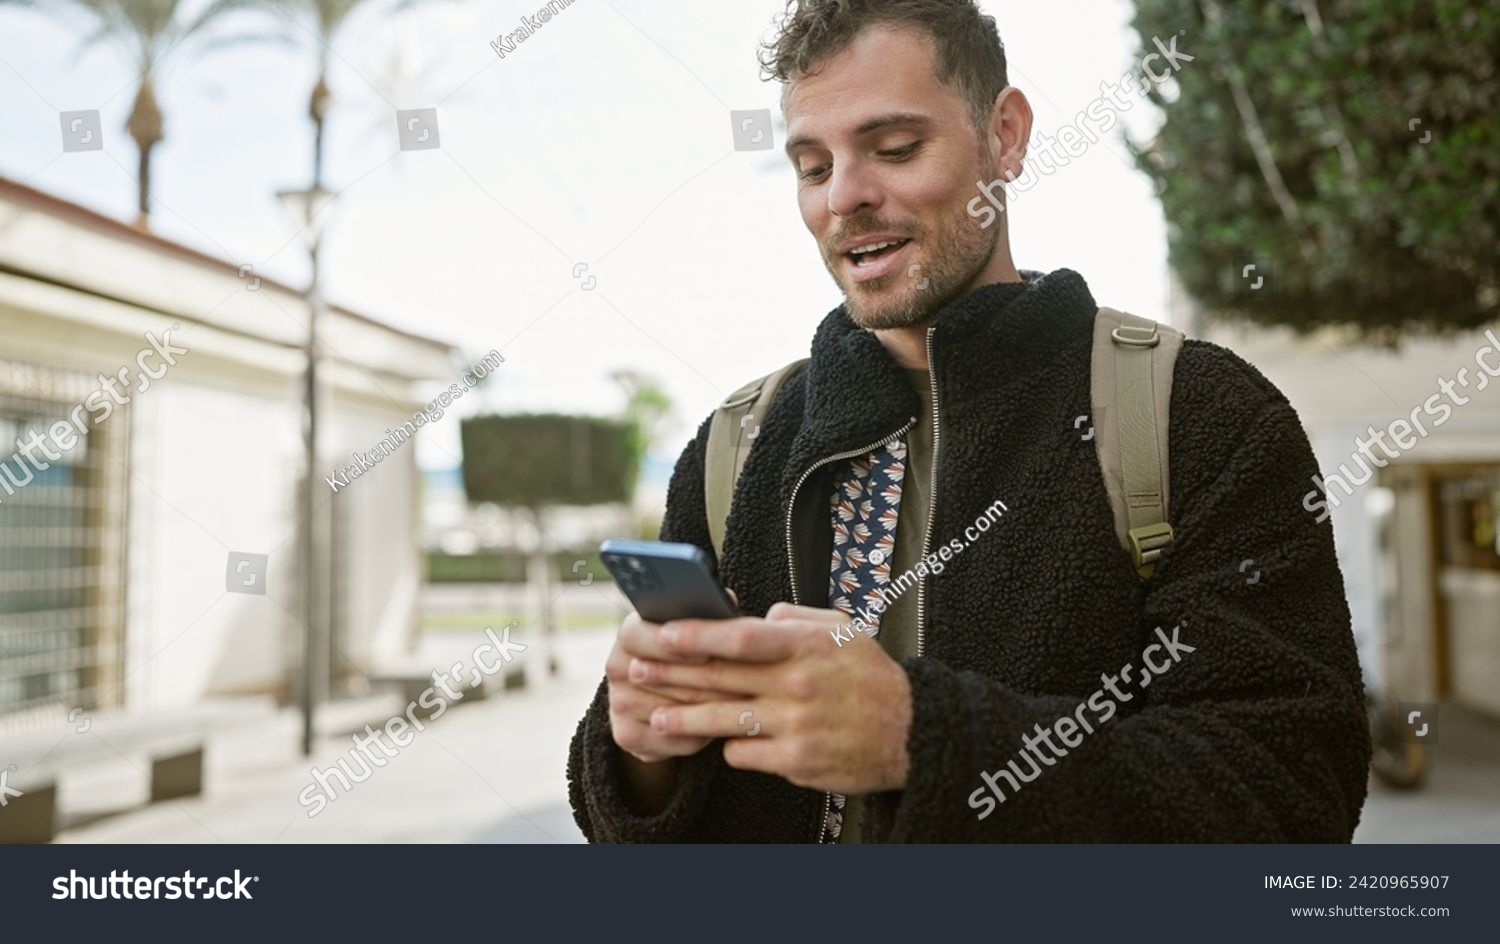 Smiling bearded young man using smartphone on a sunny city street, depicting urban life and technology. #2420965907